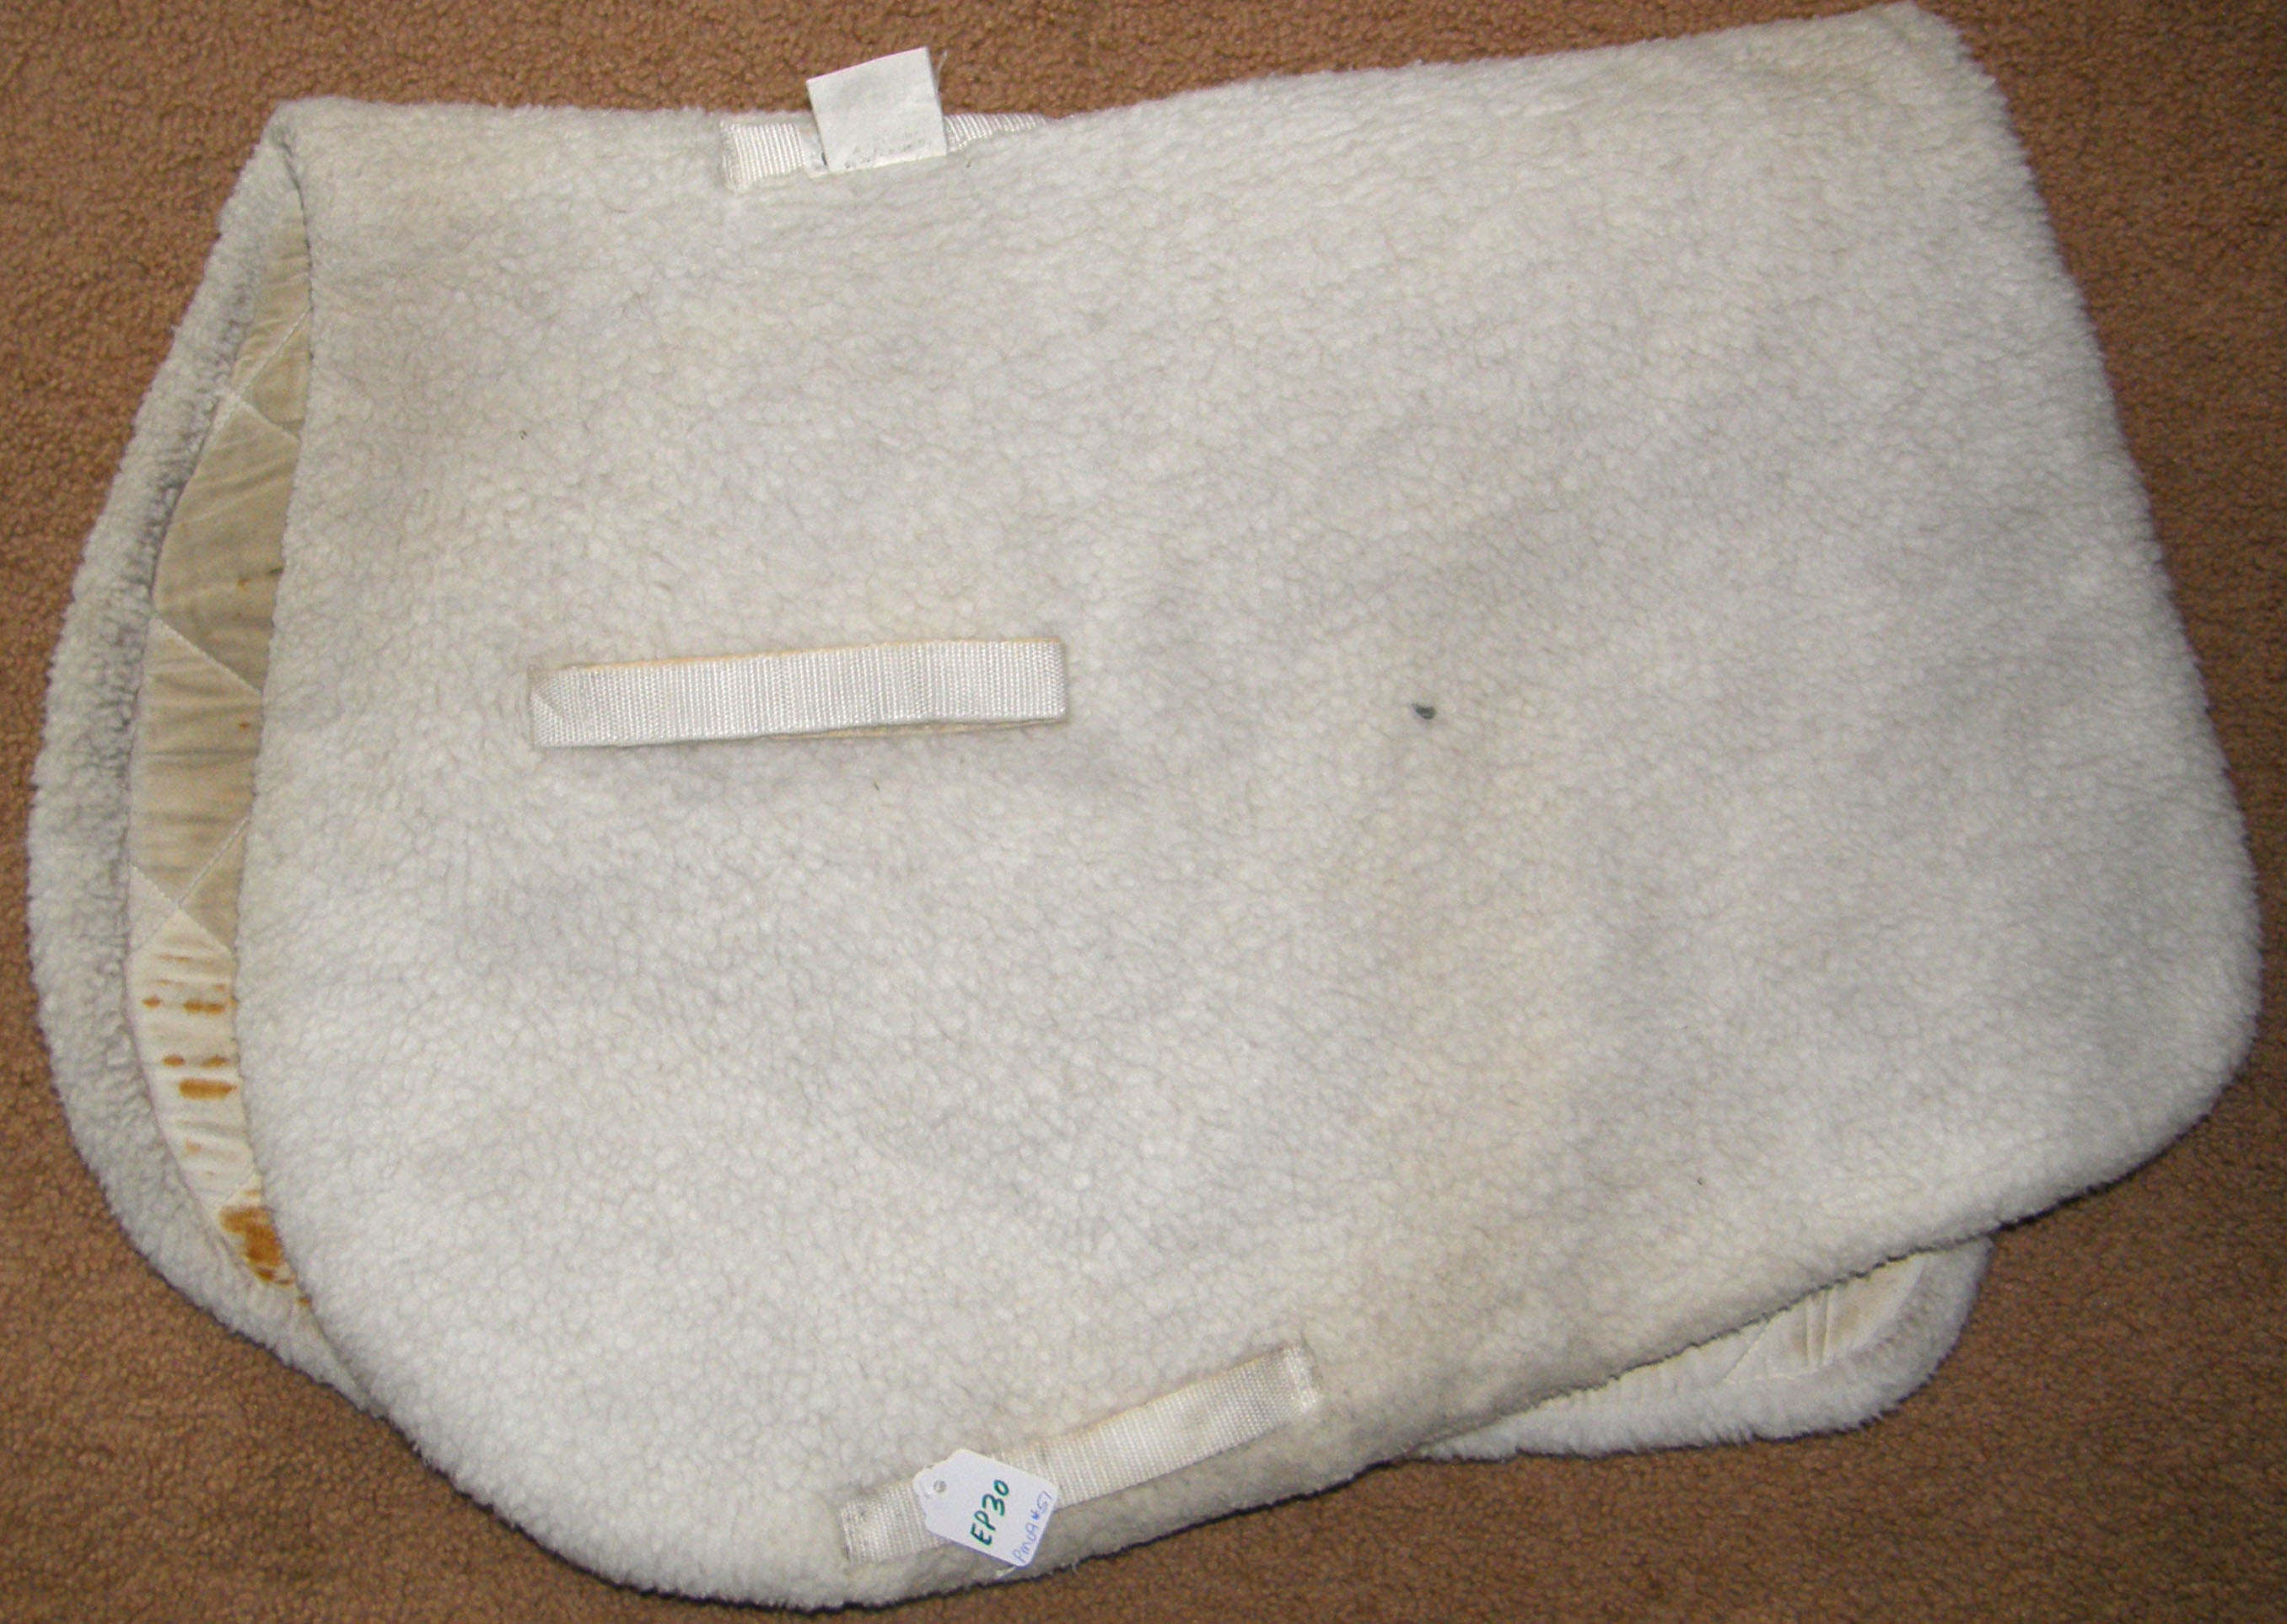 Roma Equi Fleece Quilted Cotton Lined Fleece Event Pad English Saddle Pad White